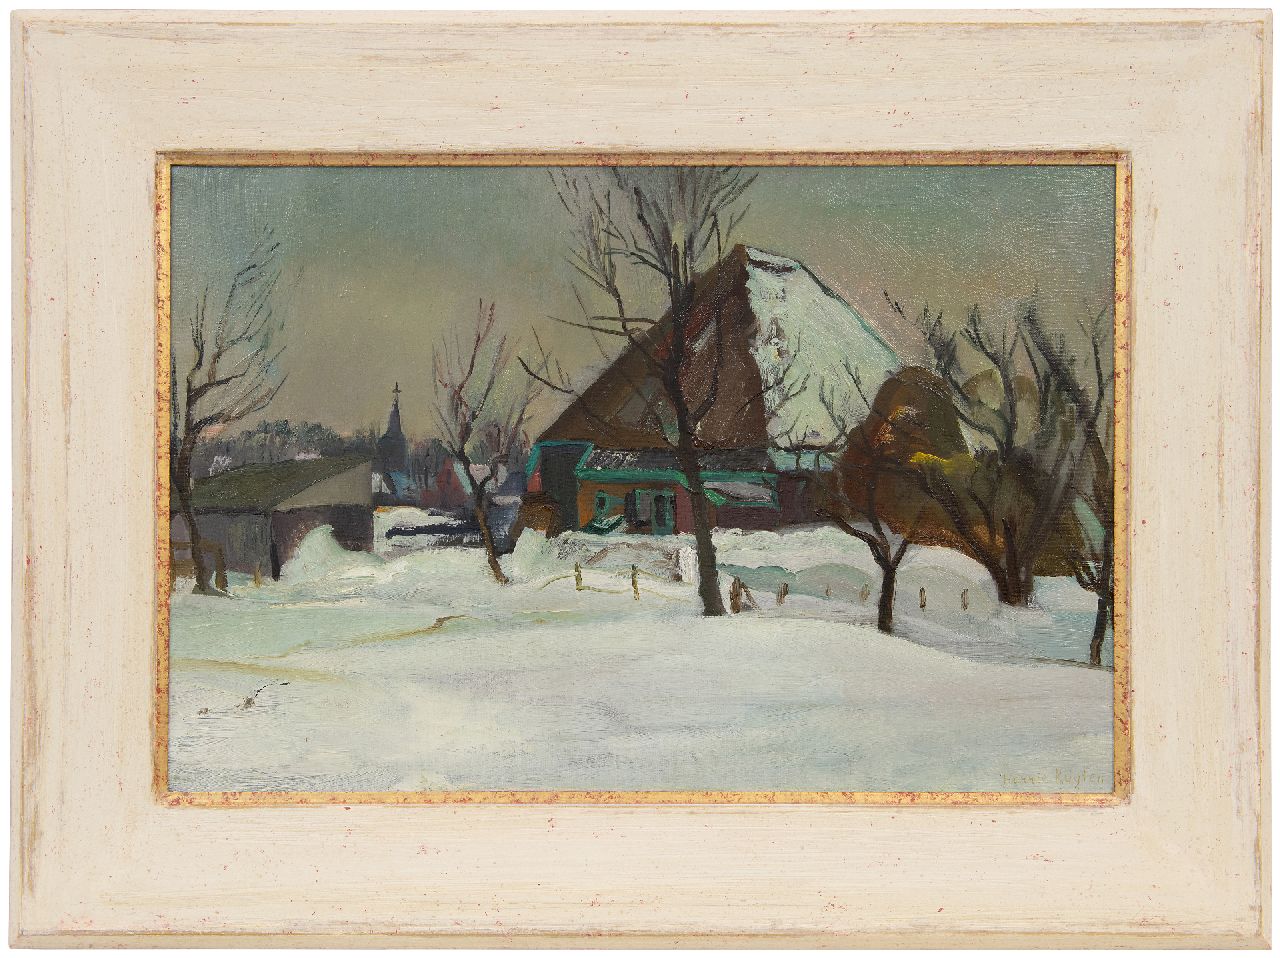 Kuijten H.J.  | Henricus Johannes 'Harrie' Kuijten | Paintings offered for sale | A farm in the snow (probably in Groet), oil on canvas 40.0 x 60.2 cm, signed l.r. and dated on the stretcher 1942